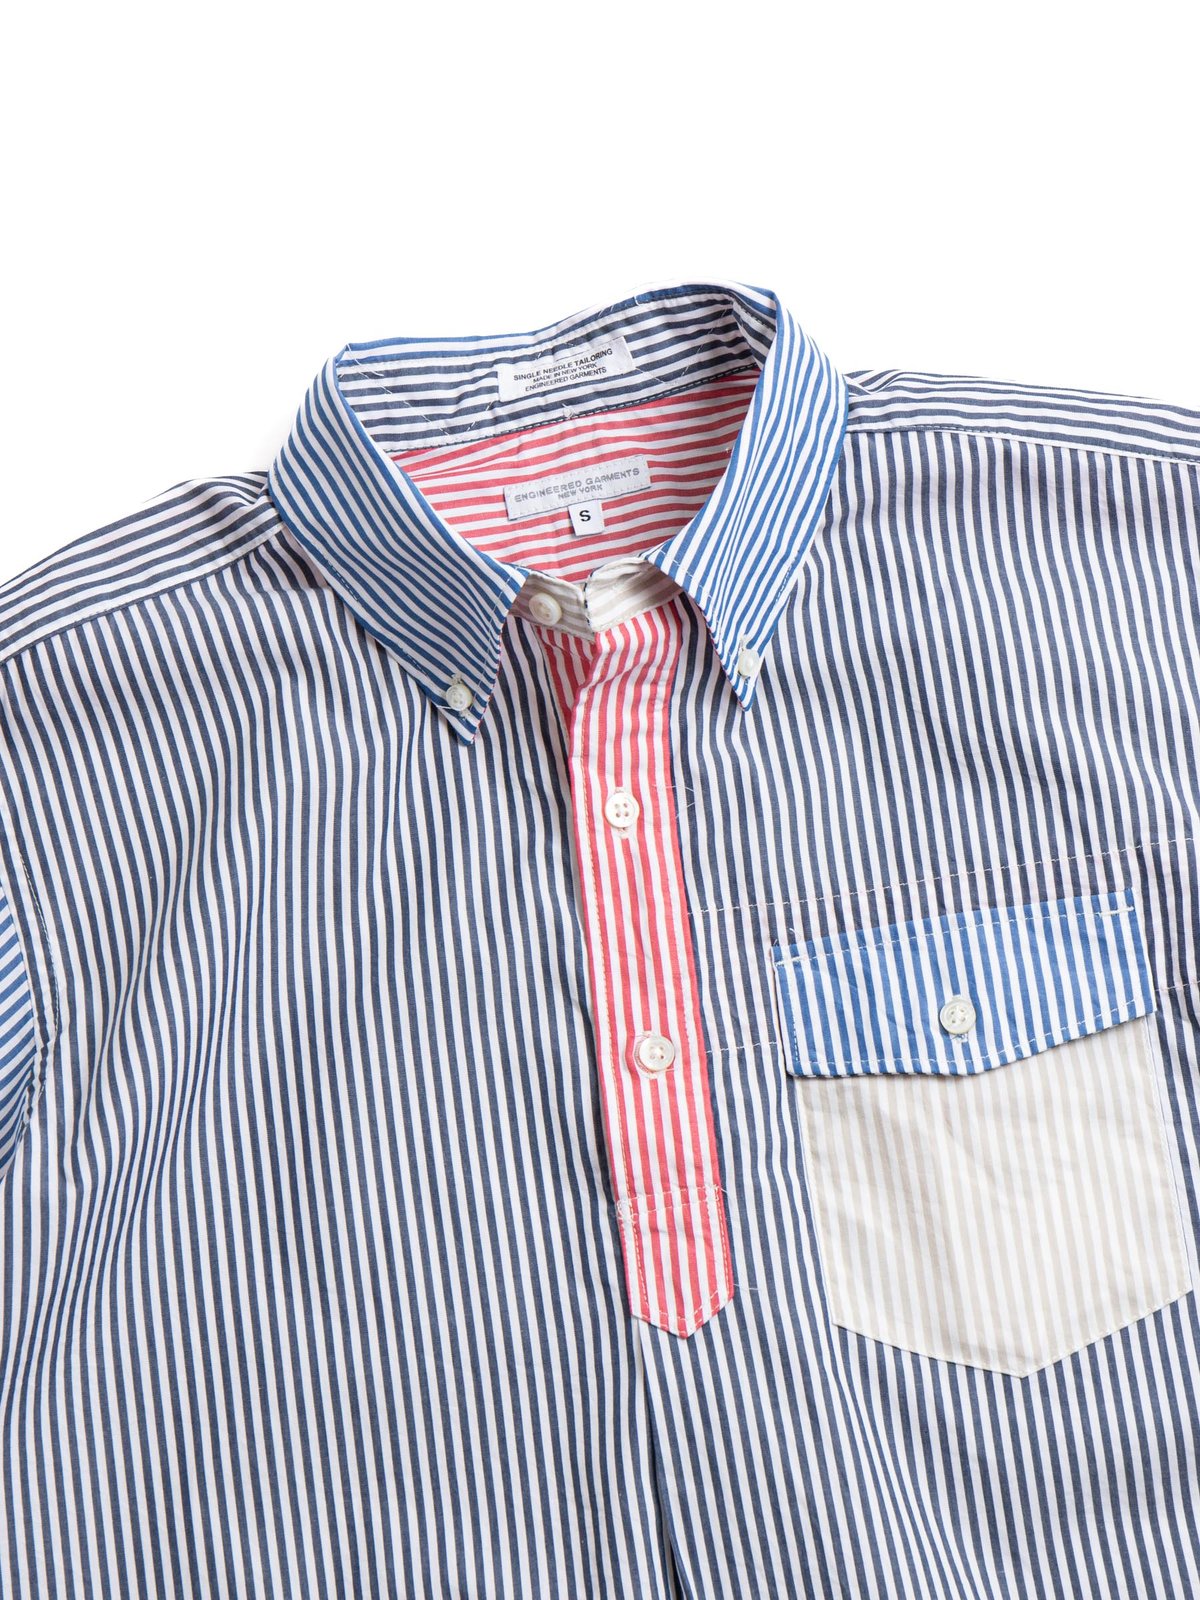 POPOVER DB SHIRT NAVY CANDY STRIPE BROADCLOTH - Image 2